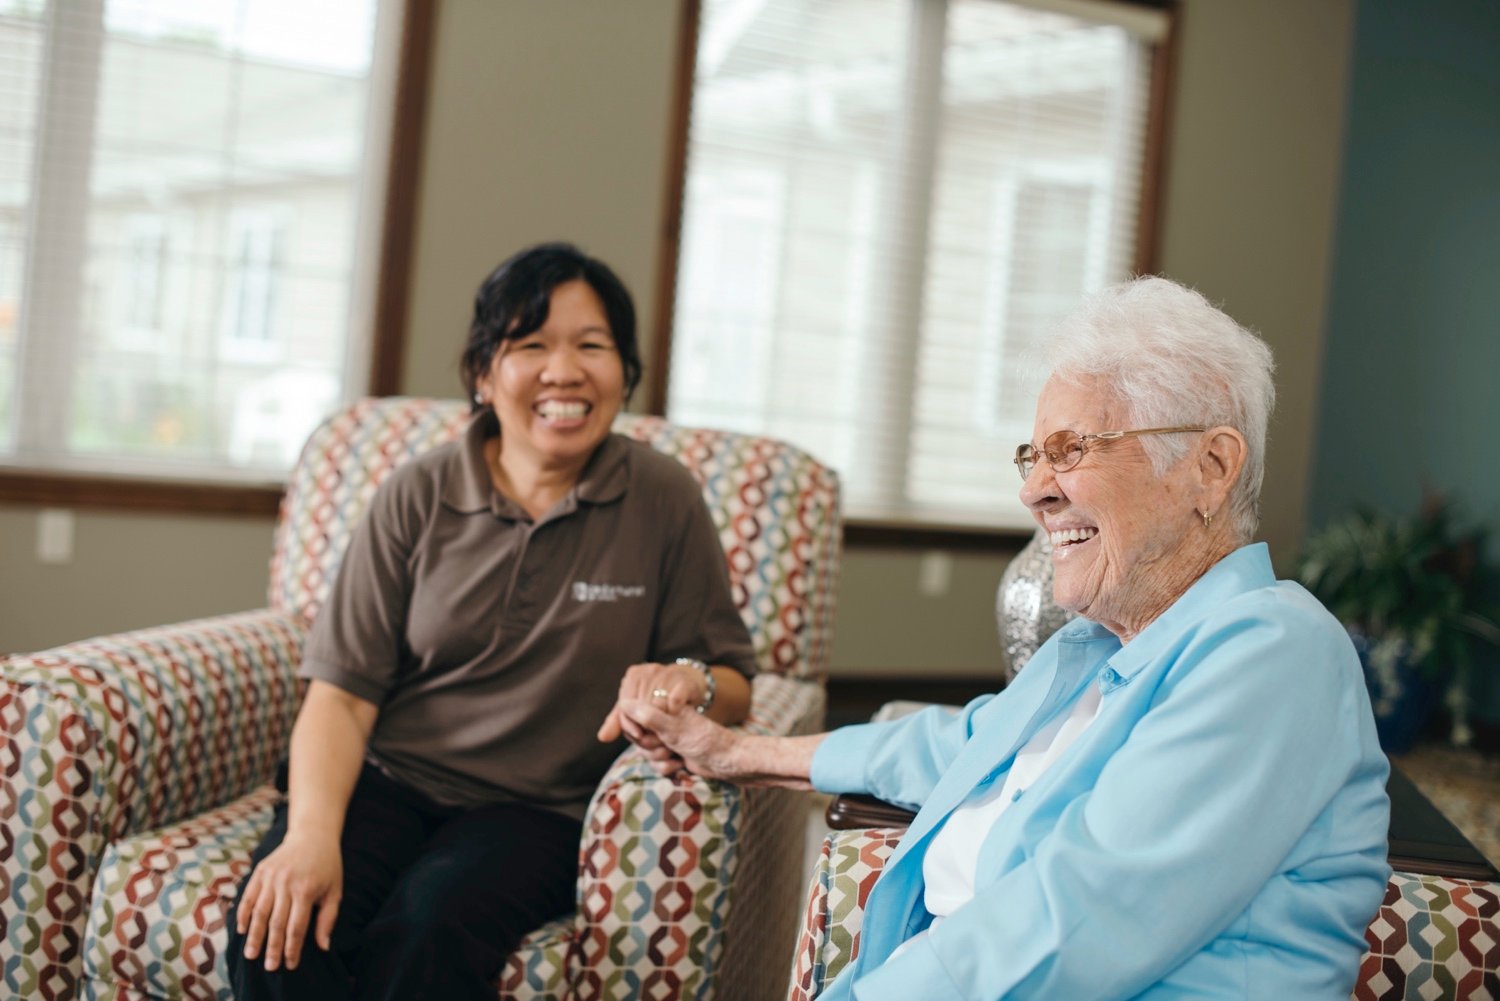 Cedarhurst staff member holding hands with a resident as they sit side-by-side